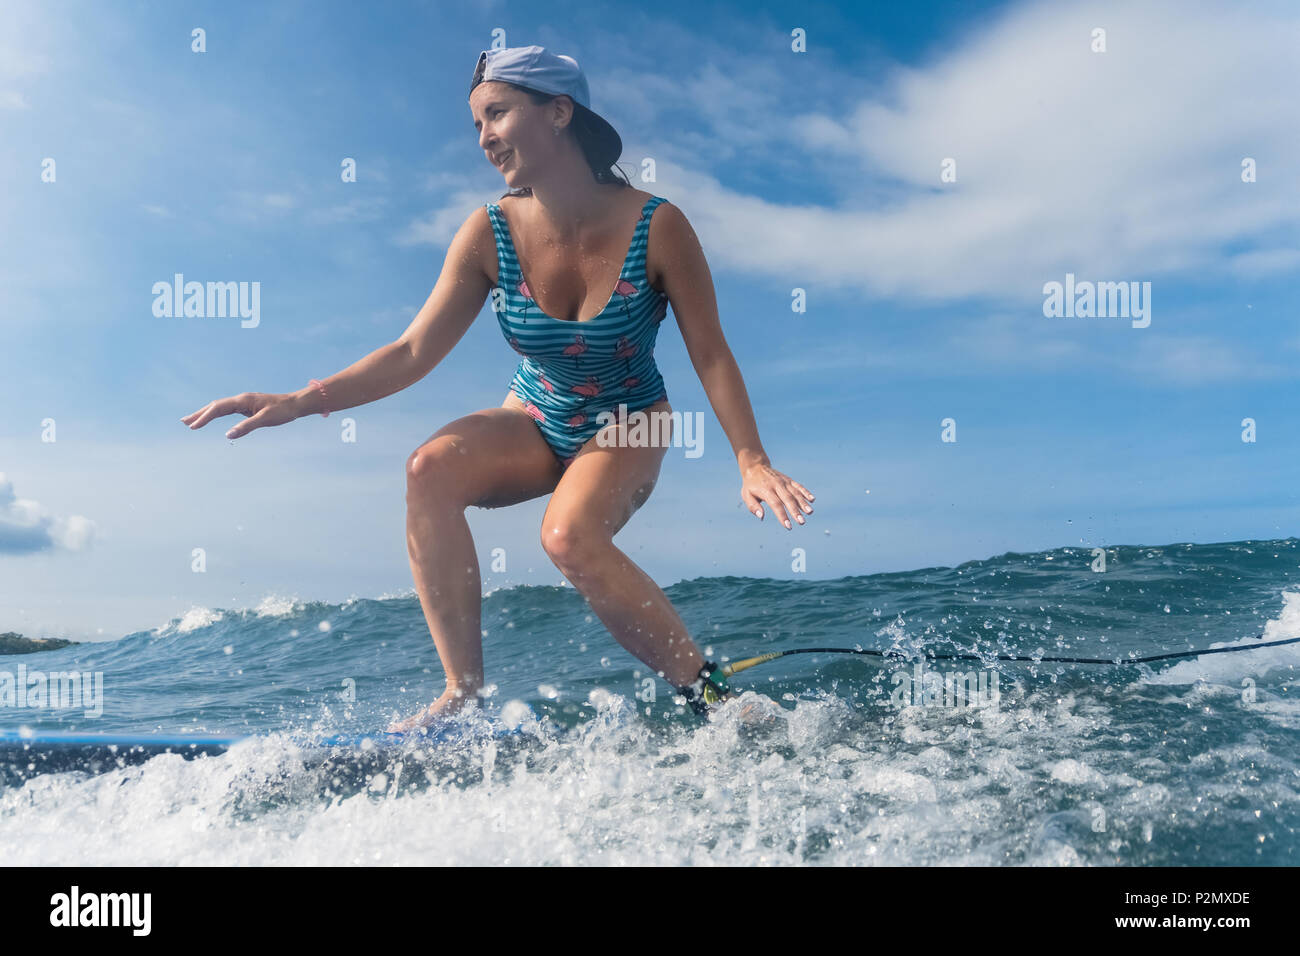 https://c8.alamy.com/comp/P2MXDE/side-view-of-woman-in-cap-and-swimming-suit-surfing-in-ocean-P2MXDE.jpg